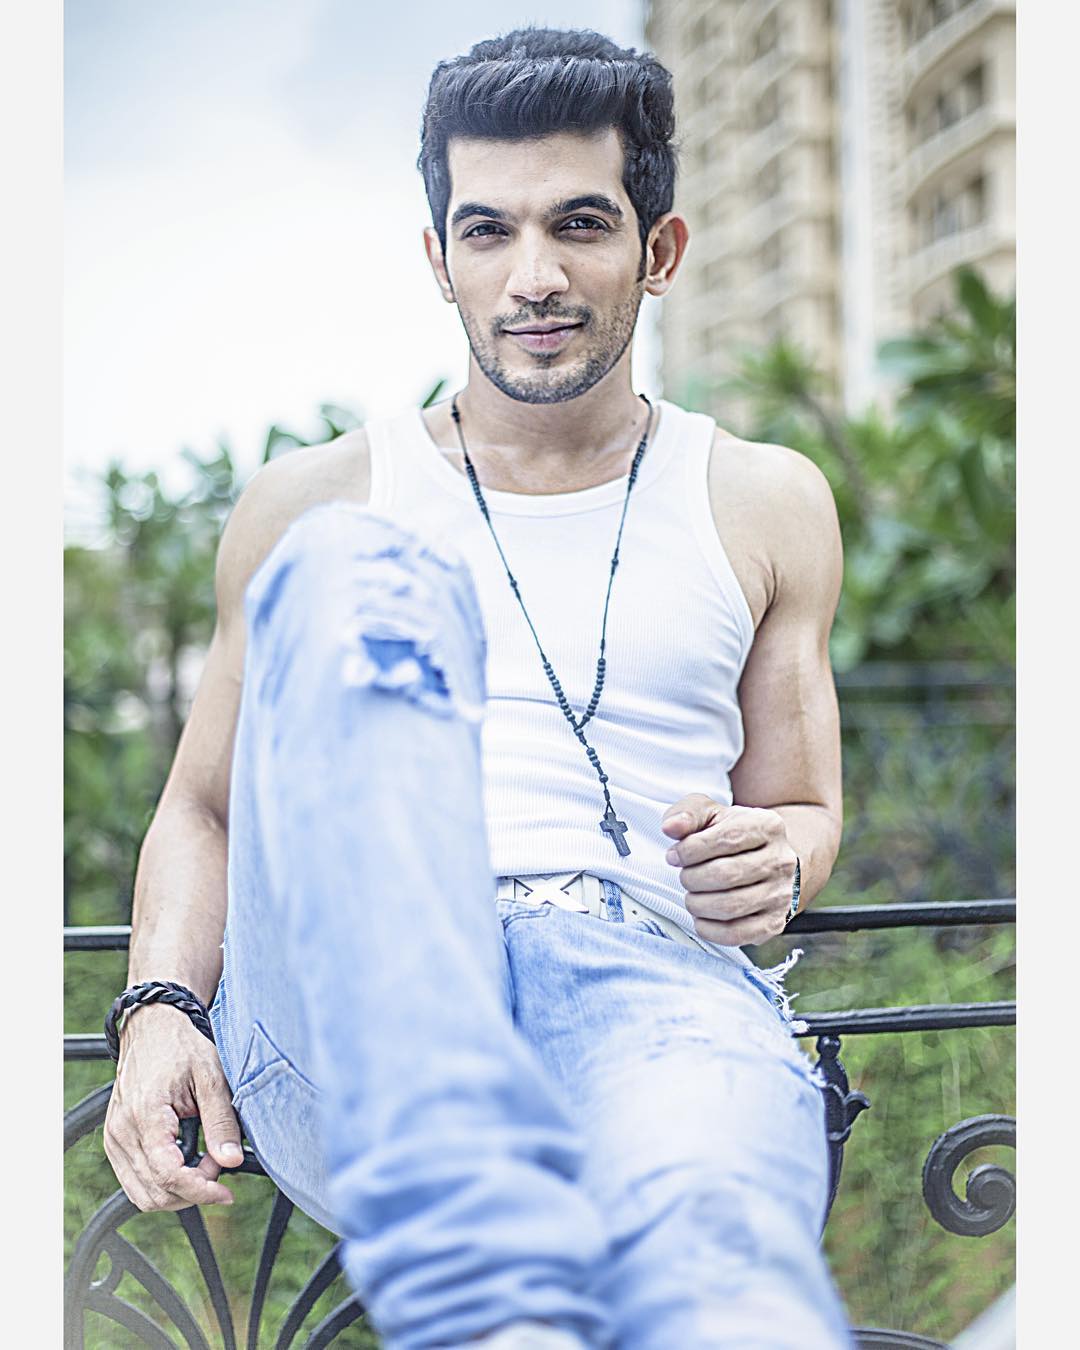 Exclusive - Arjun Bijlani on the dull phase in his career after Miley Jab  Hum Tum: I was sad and depressed but told myself I'm capable of achieving  big things - Times